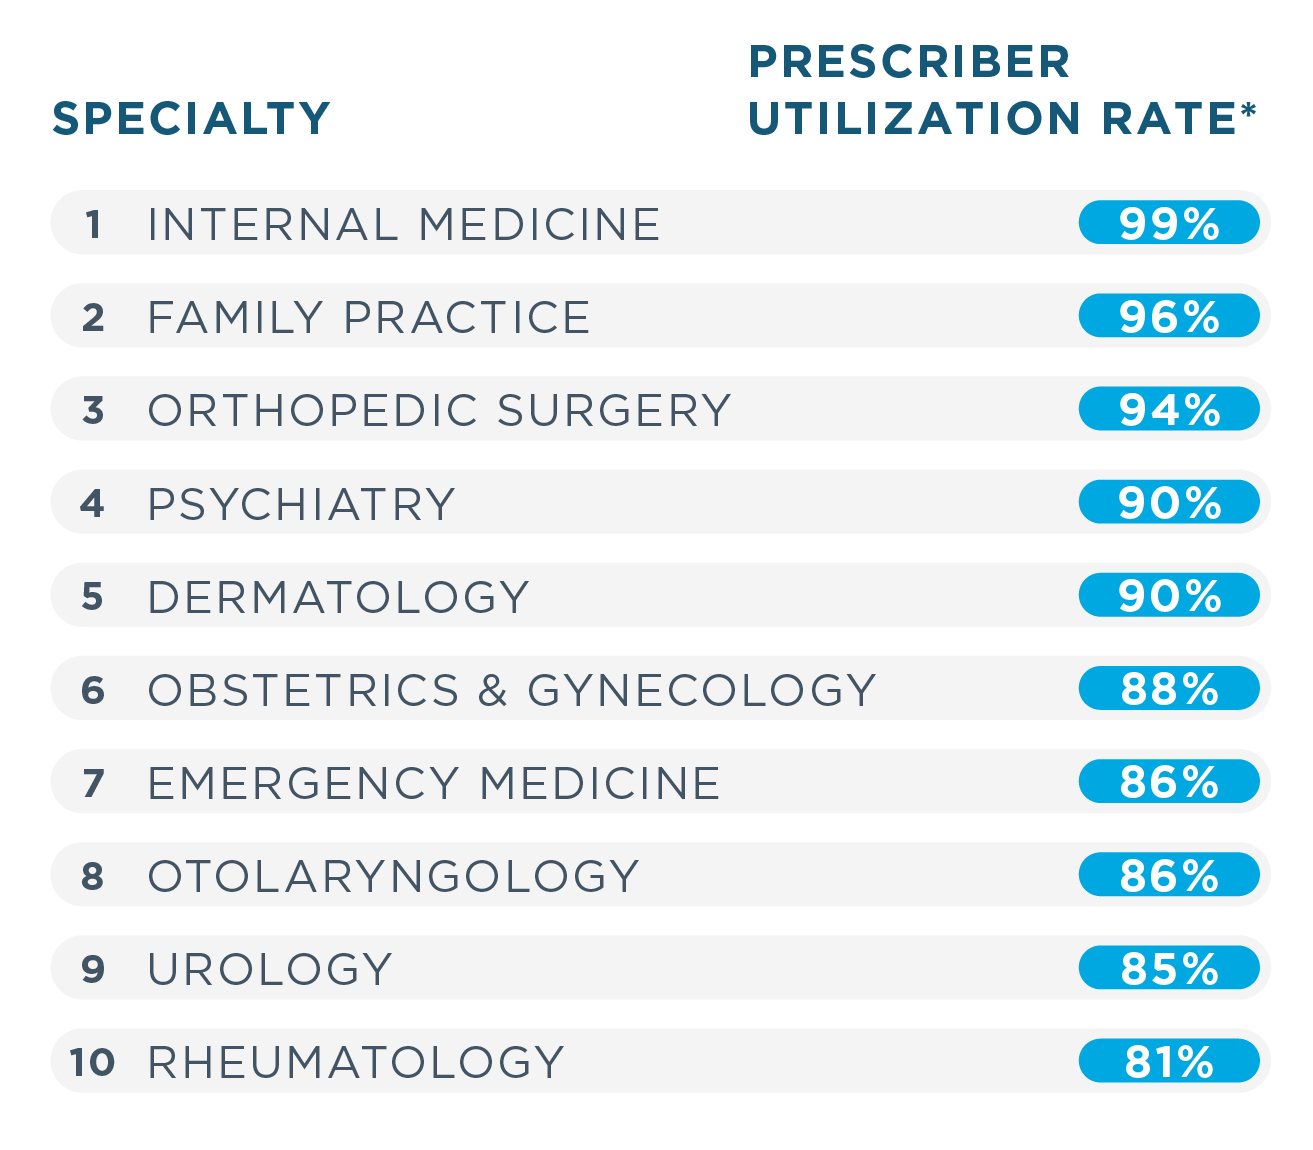 The top 10 medical specialties using E-Prescribing in 2020 were internal medicine with a 99% utilization rate, family practice with 96%, orthopedic surgery with 94%, psychiatry and dermatology with 90% each, obstetrics and gynecology with 88%, emergency medicine and otolaryngology with 86% each, urology with 85% and rheumatology with 81%. 